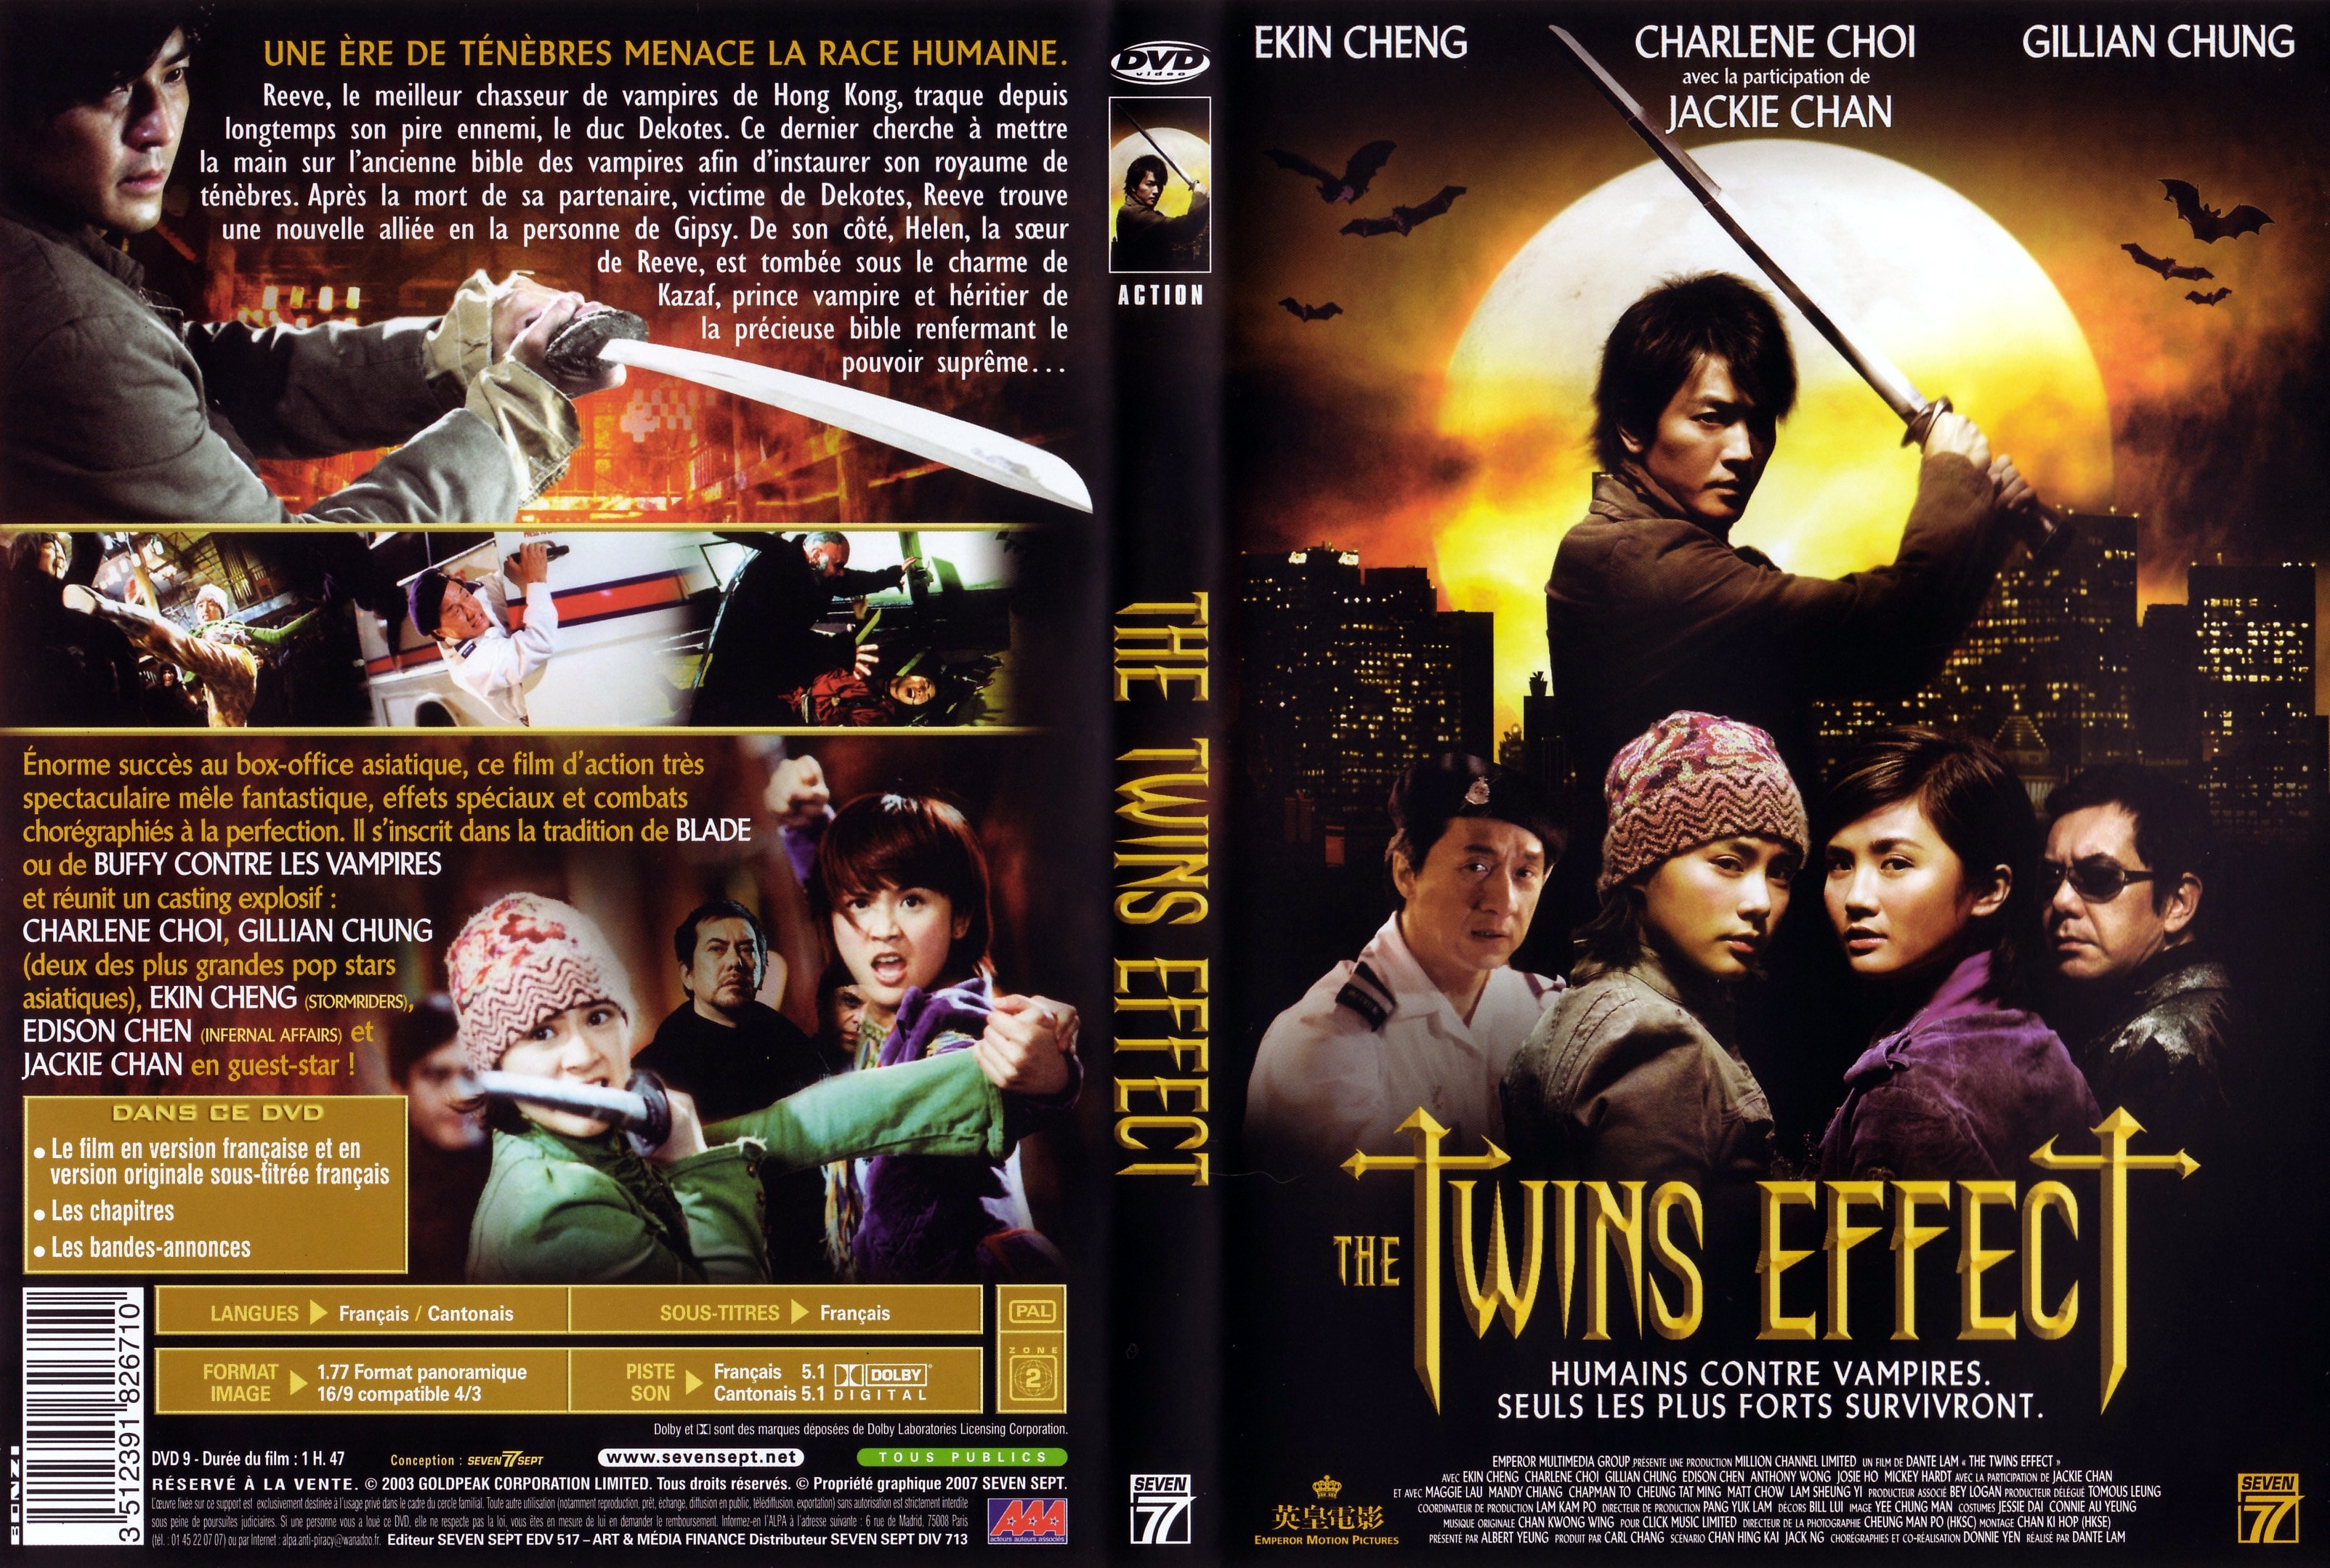 Jaquette DVD The twins effect